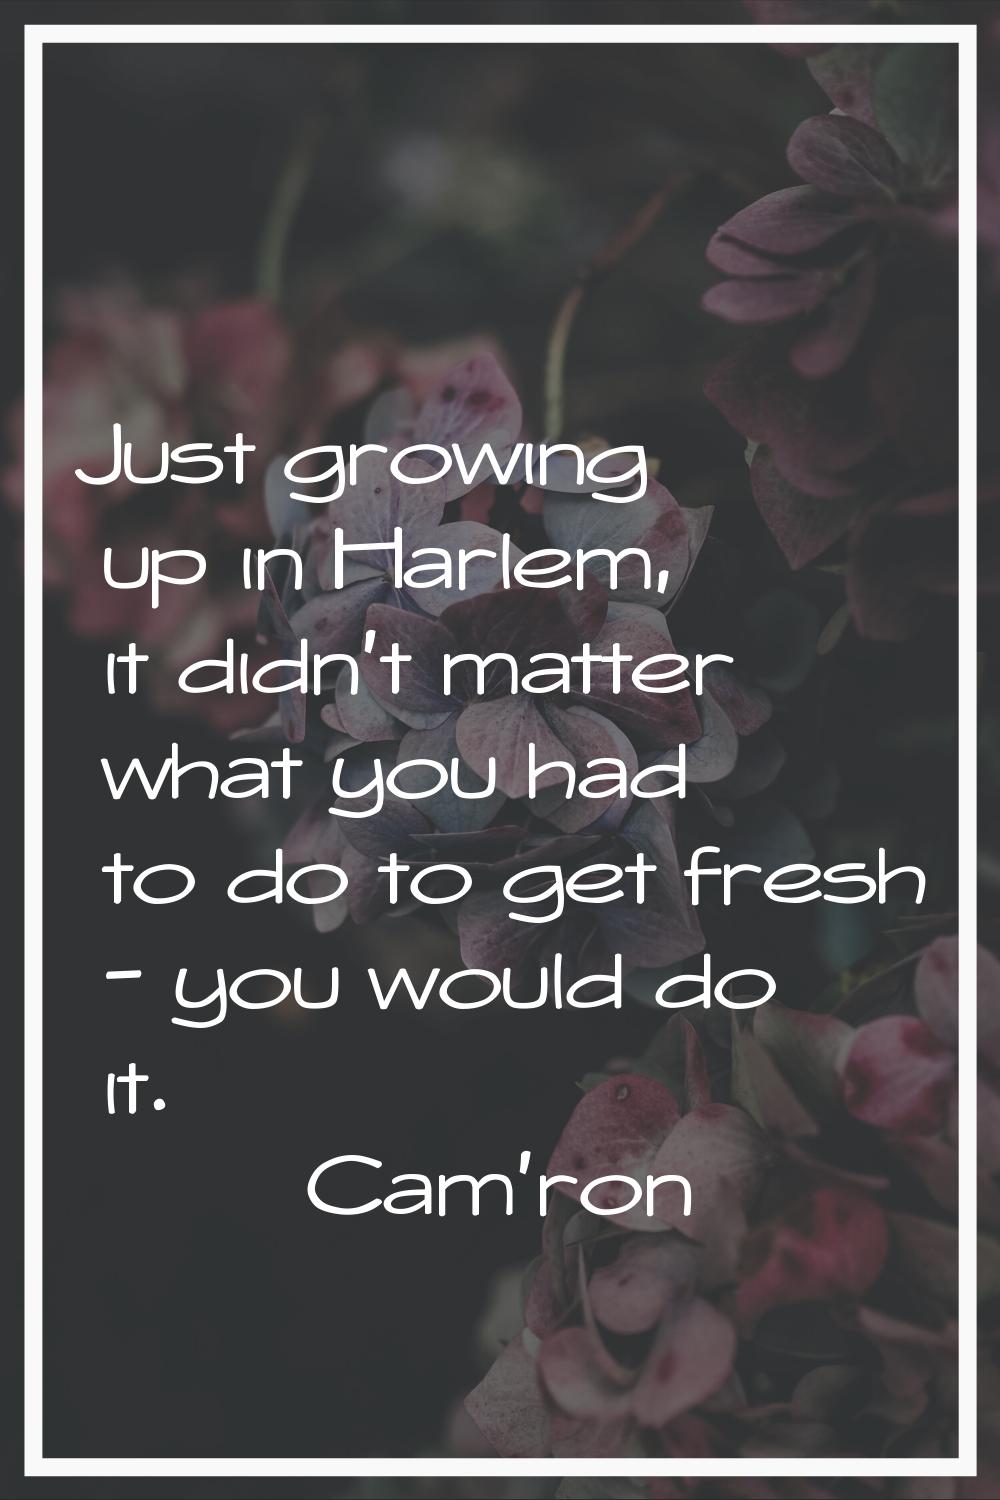 Just growing up in Harlem, it didn't matter what you had to do to get fresh - you would do it.